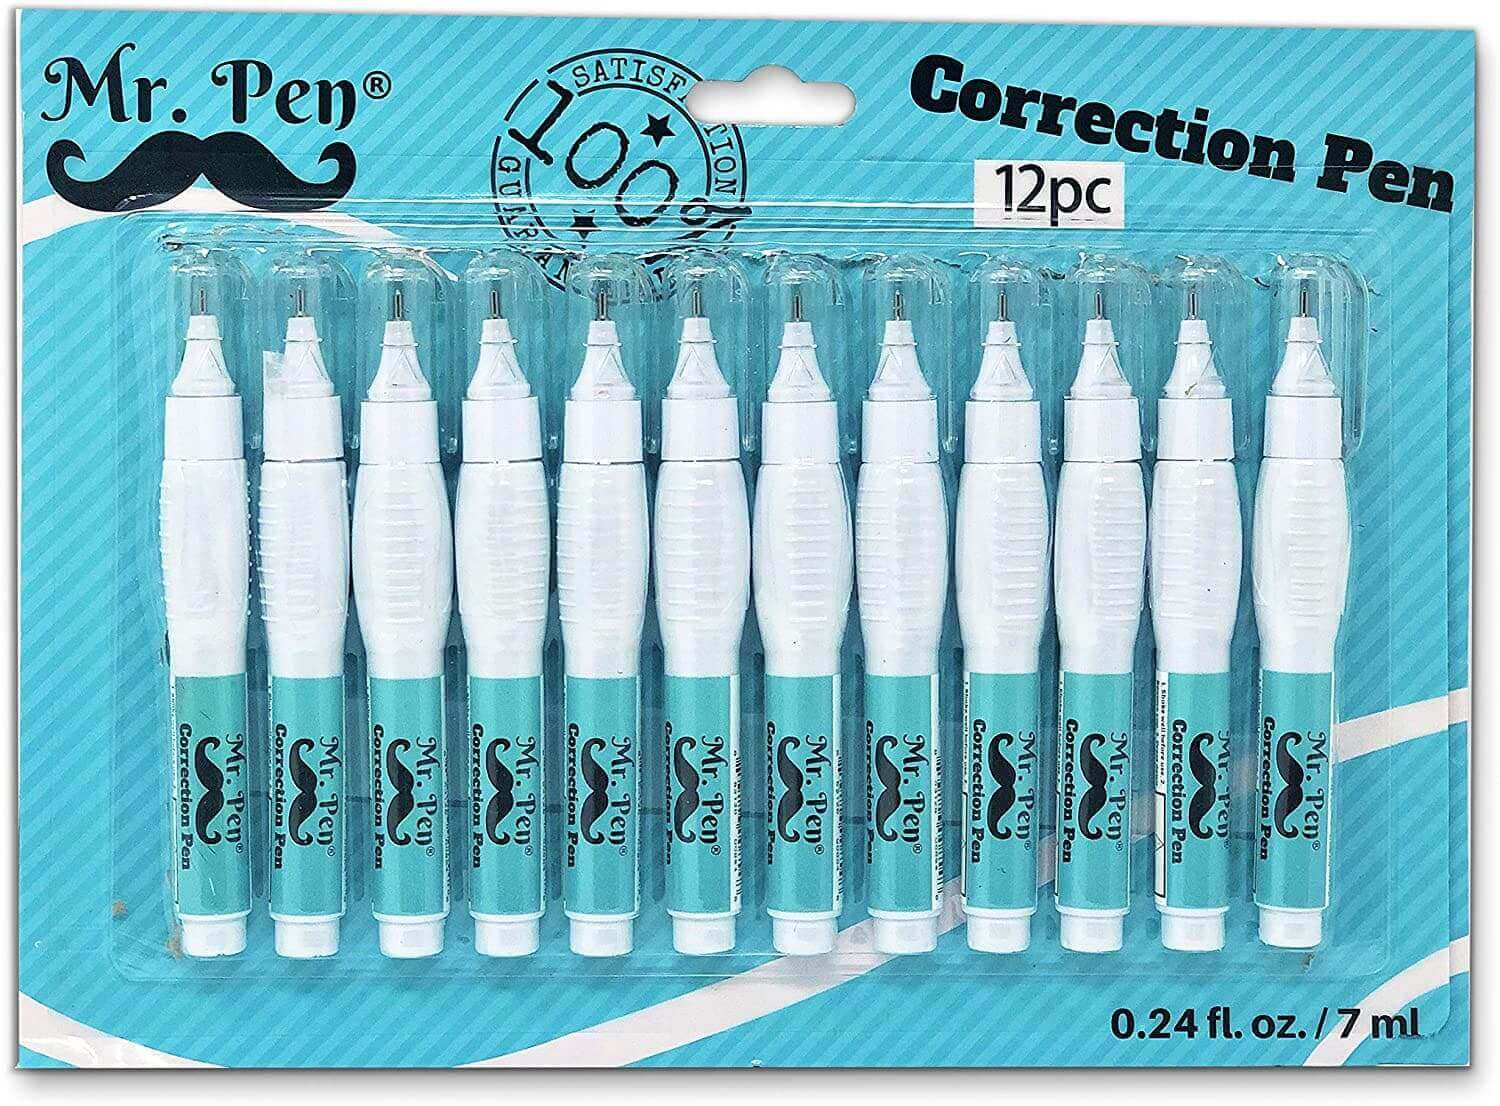 A 12-pack of blue and white correction pens.